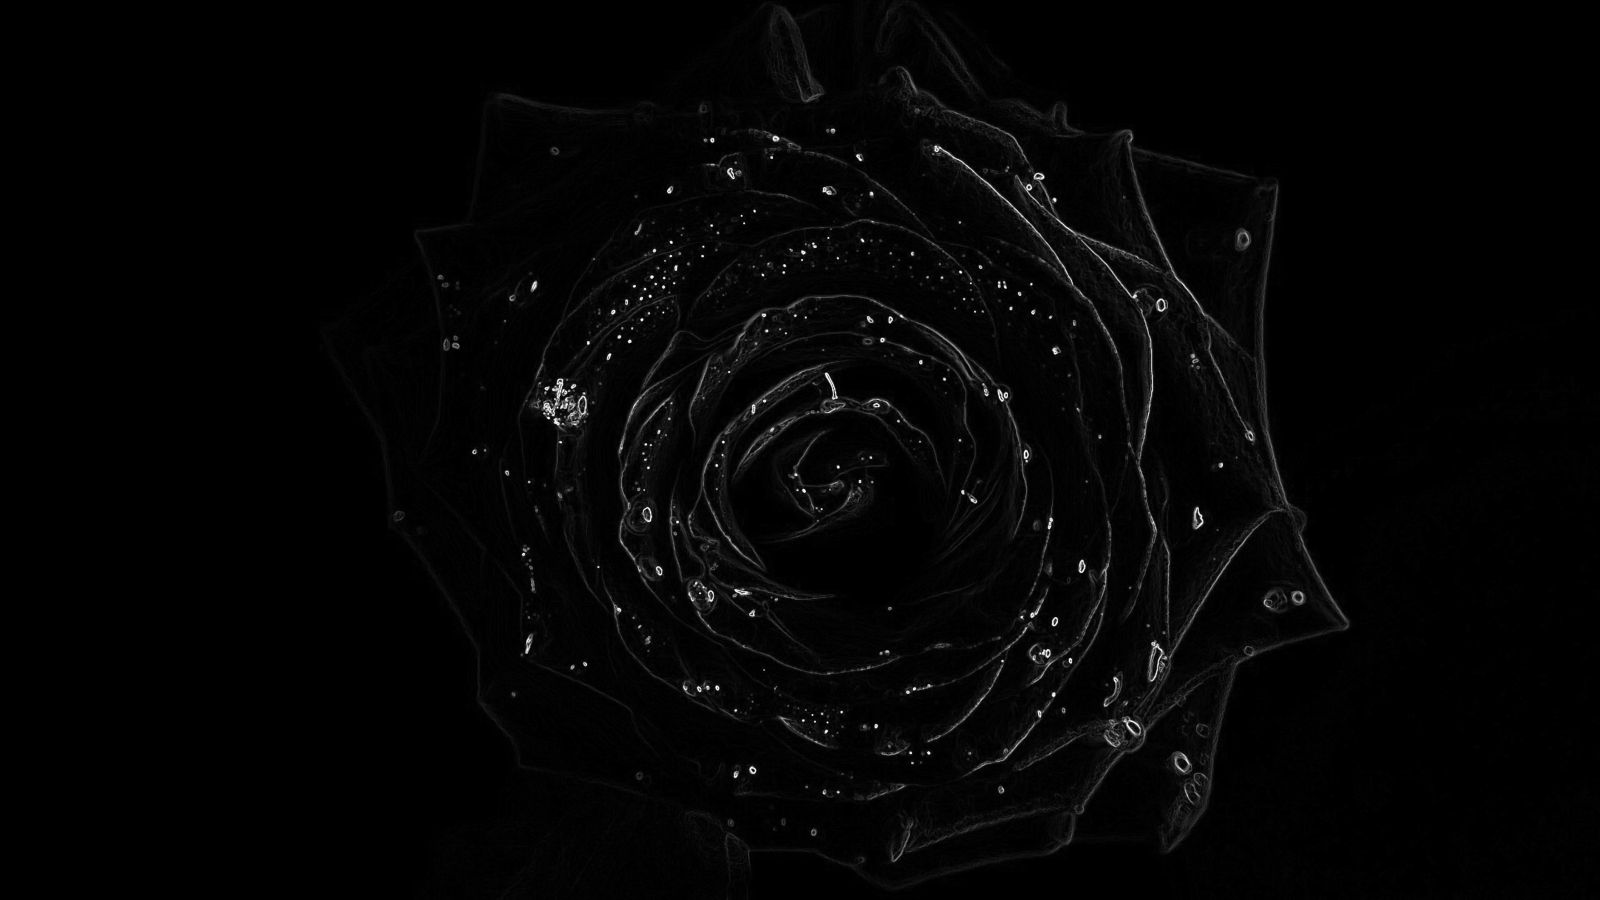 Black Rose Ultra HD Background Picture Image